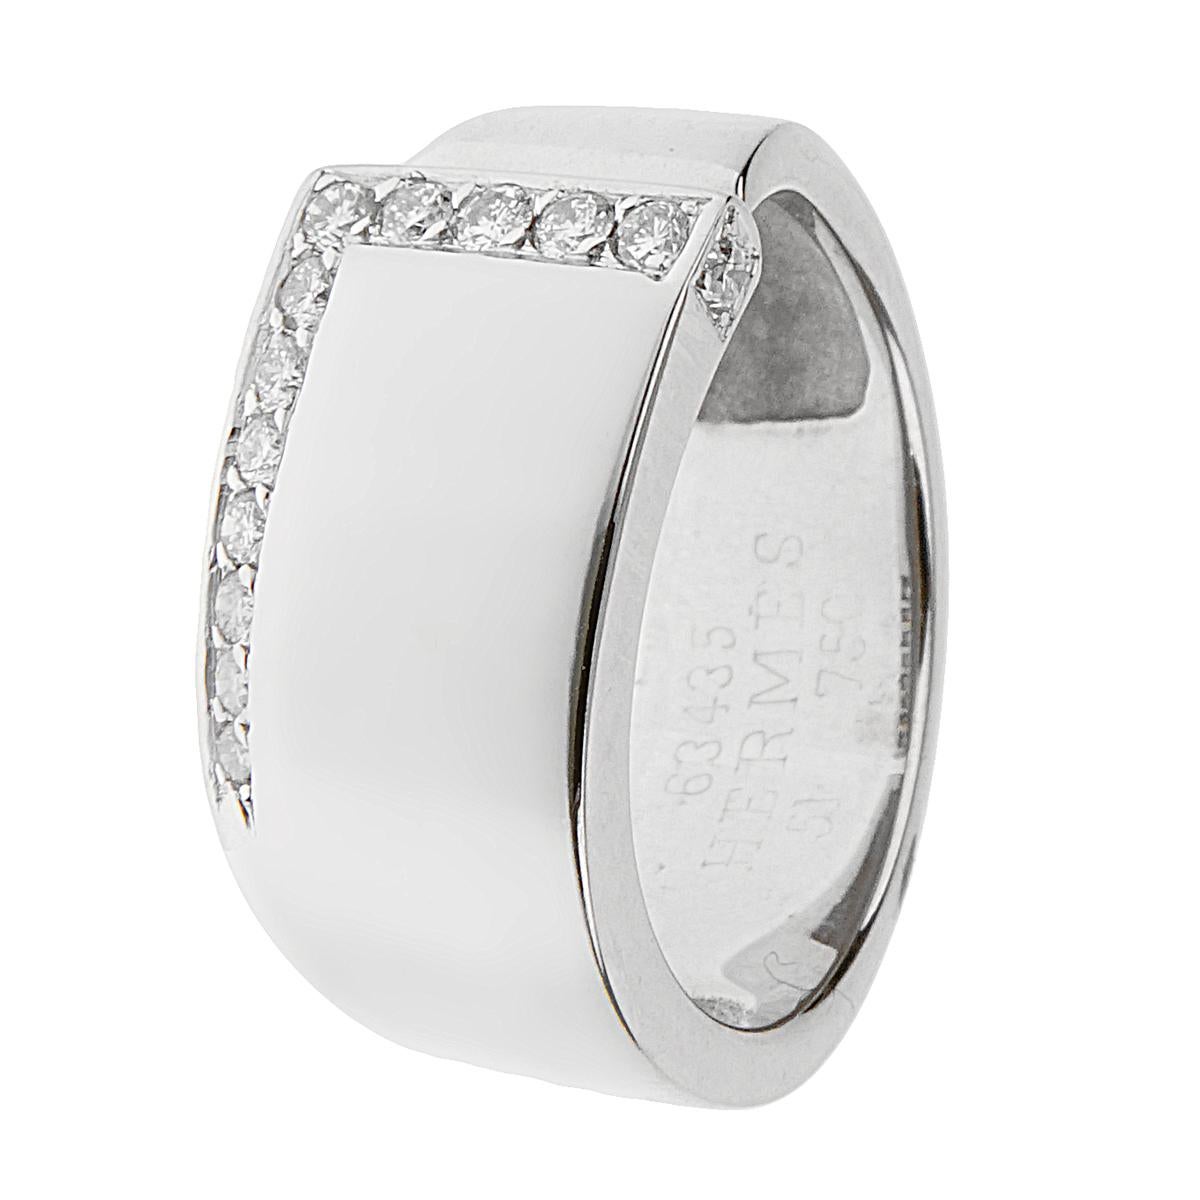 A fabulous Hermes diamond cocktail ring showcasing an open motif band design adorned with the finest original Hermes round brilliant cut diamonds in shimmering 18k white gold. The ring measures a size 6 and can be resized if needed.